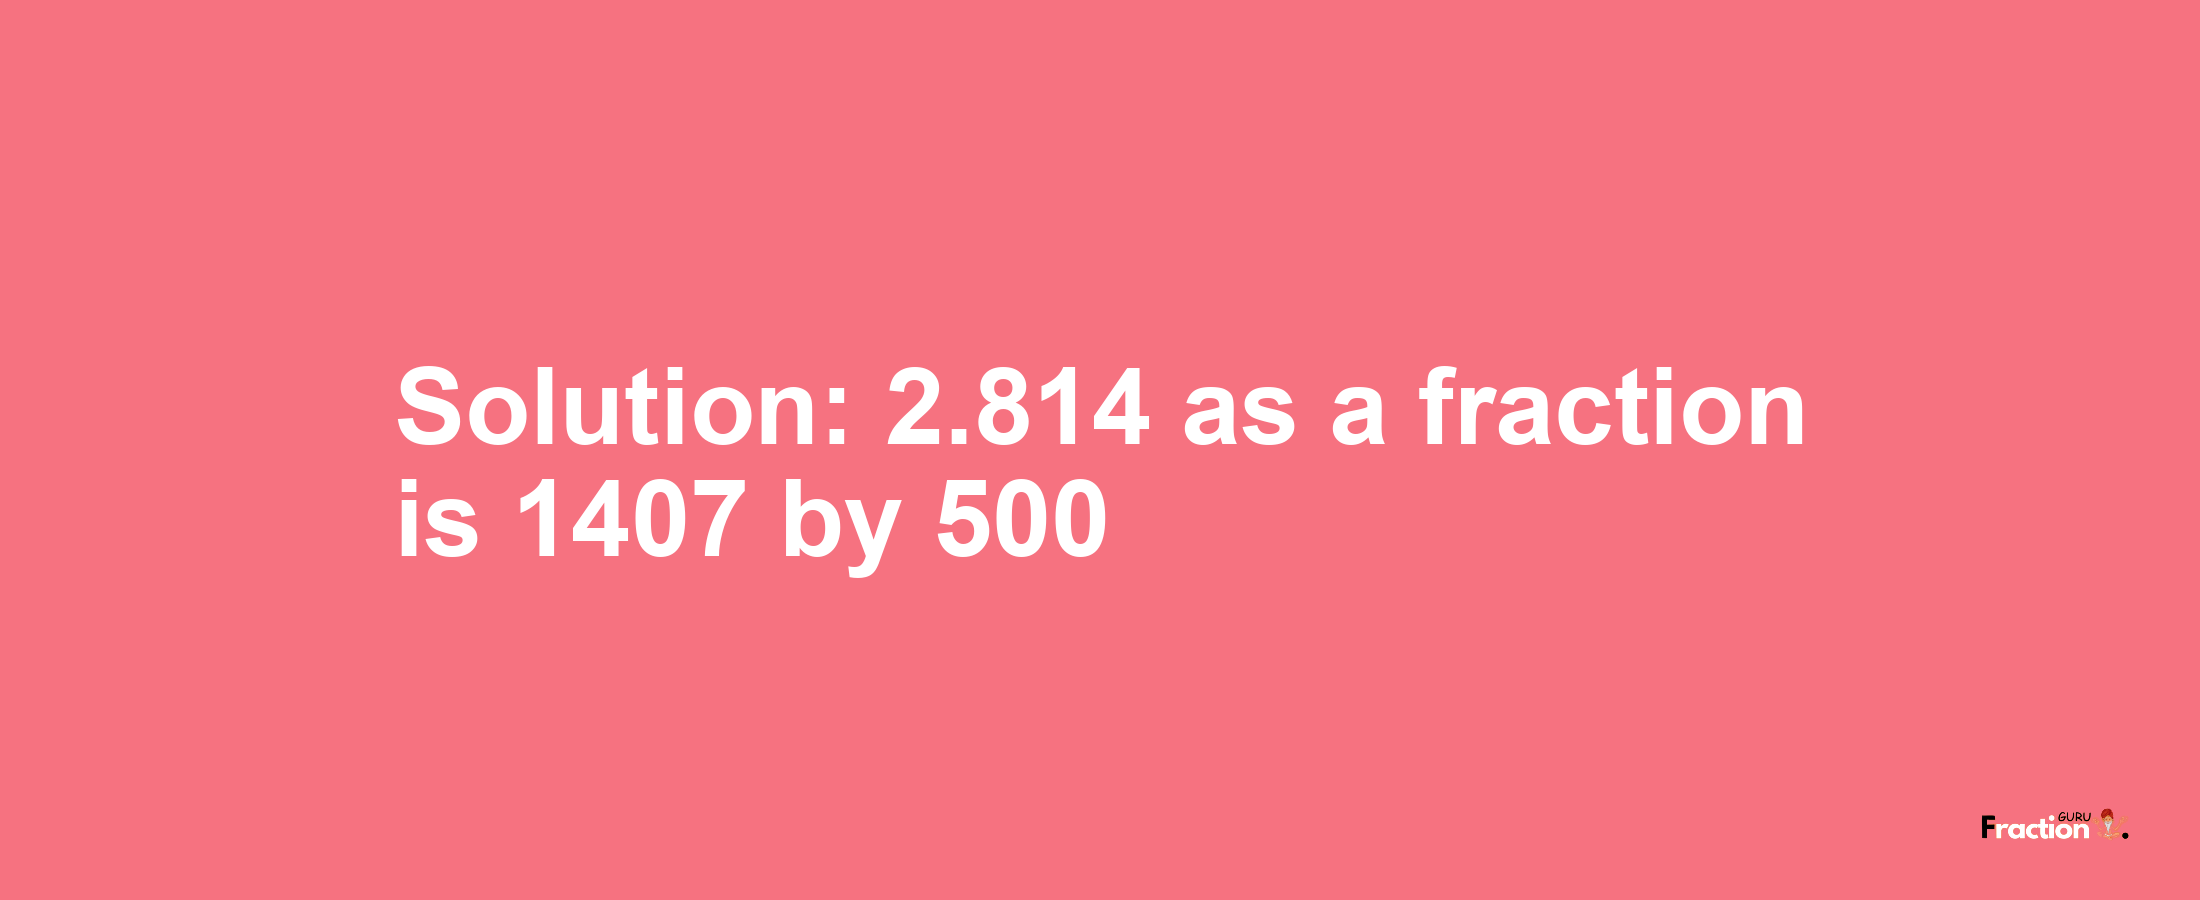 Solution:2.814 as a fraction is 1407/500